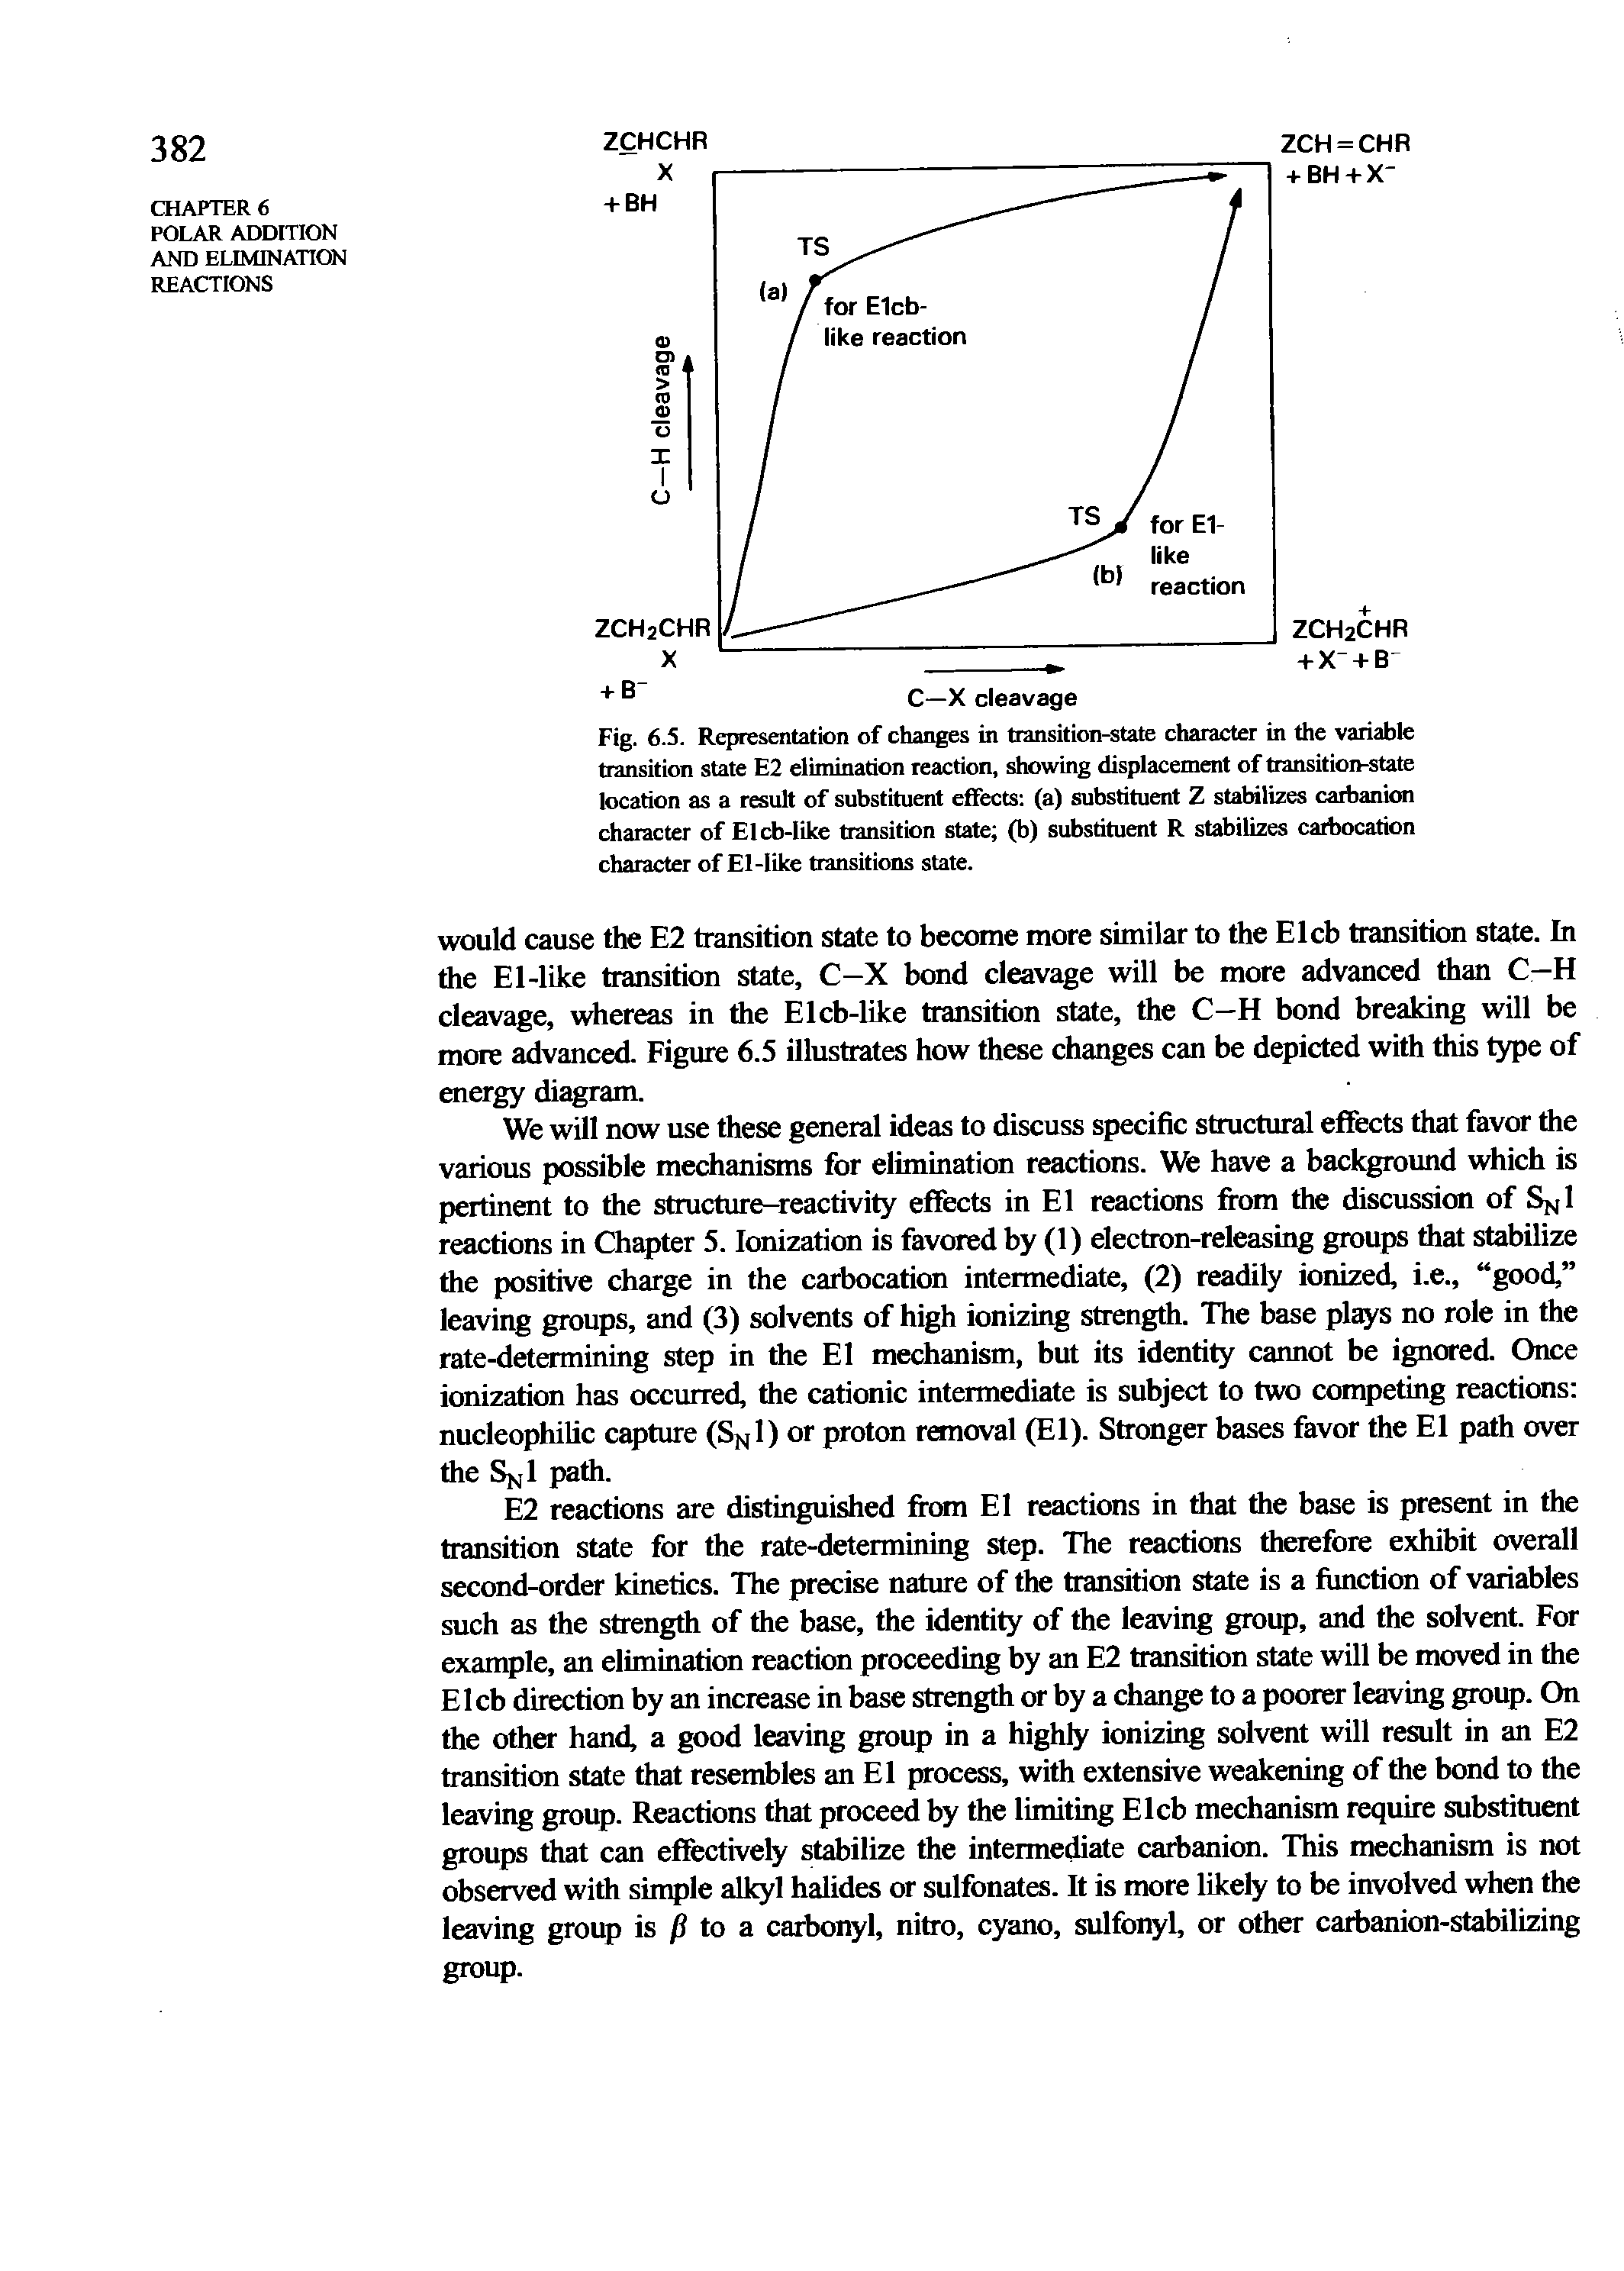 Fig. 6.5. Representation of changes in transition-state character in the variable transition state E2 elimination reaetion, showing displacement of transition-state location as a result of substituent effects (a) substituent Z stabilizes catfaanion character of Elcb-like transition state (b) substituent R stabilizes carbocation character of El-like transitions state.